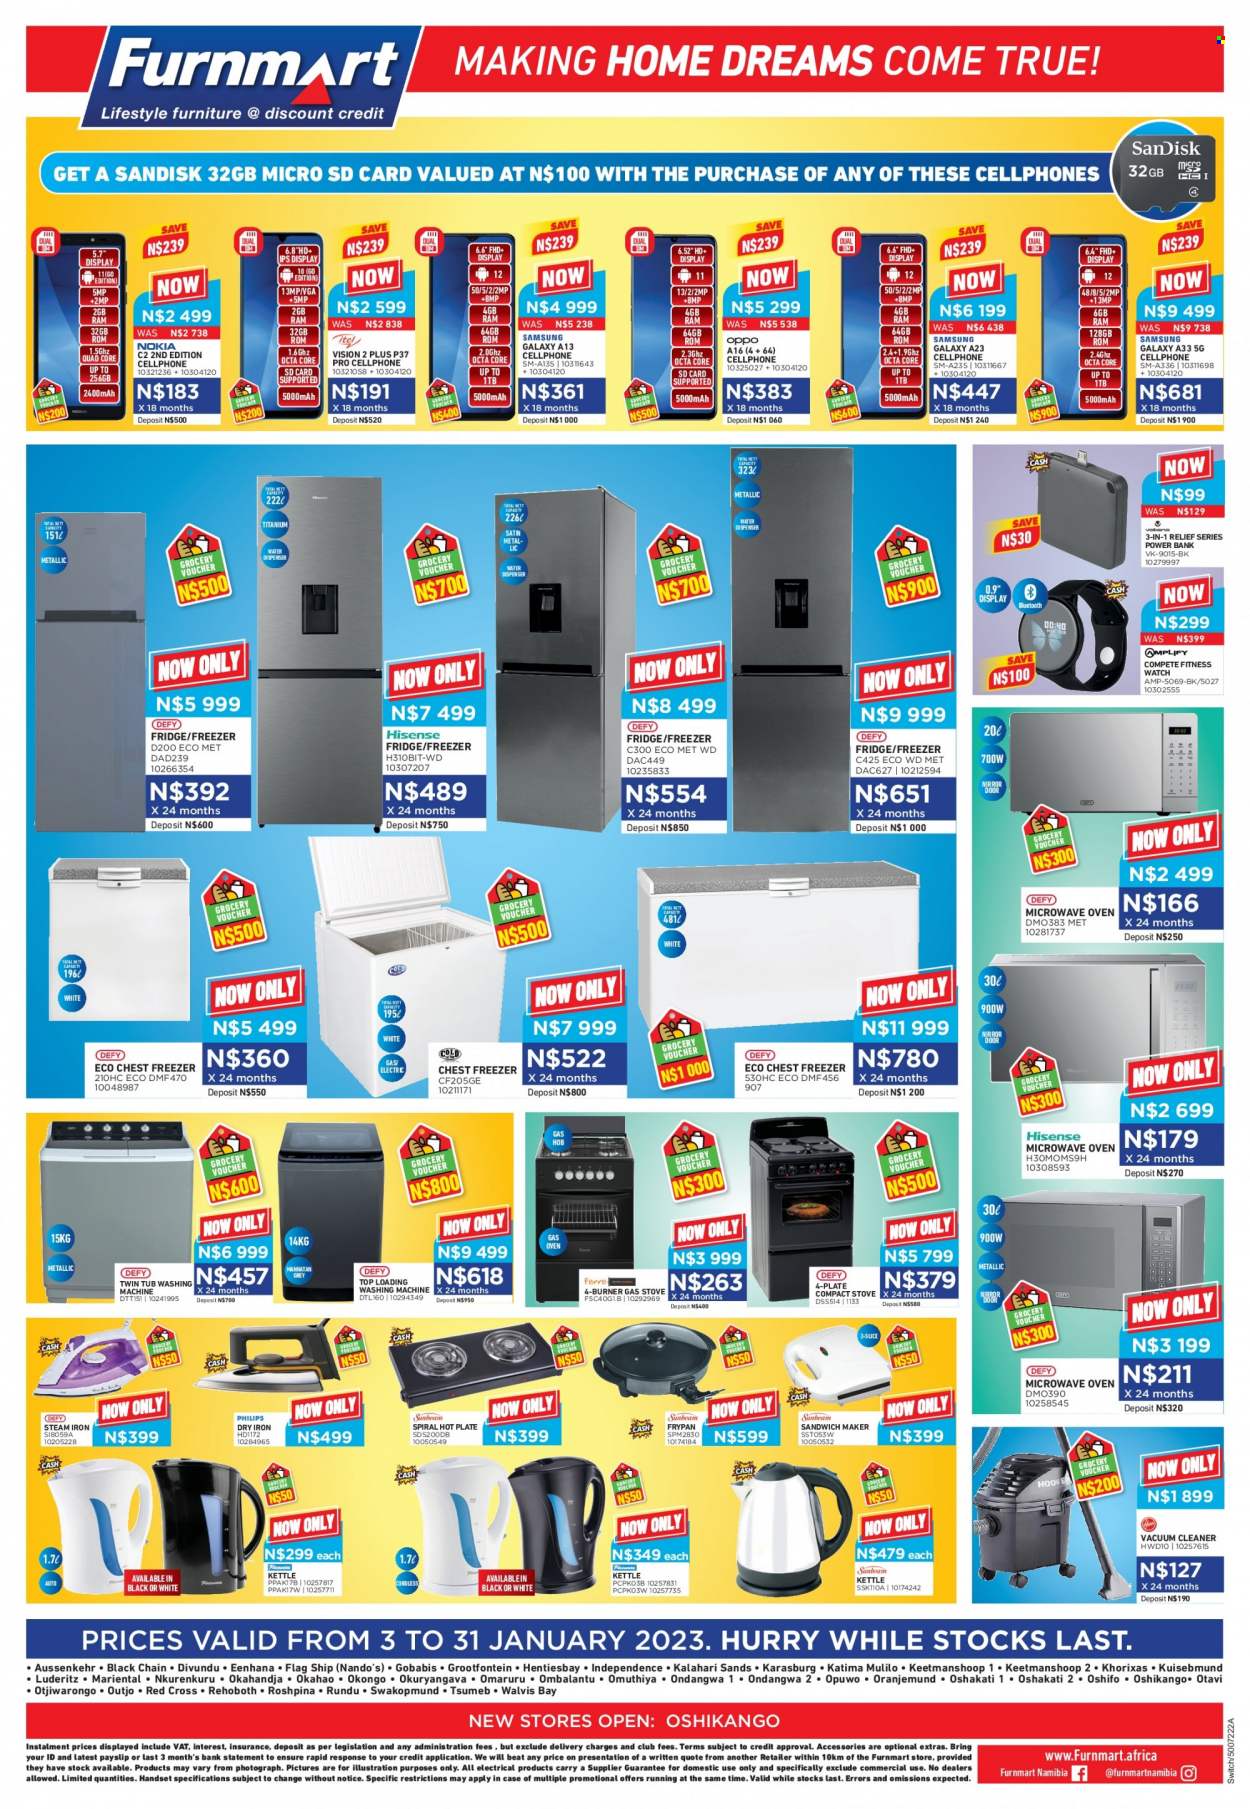 thumbnail - Furnmart catalogue  - 03/01/2023 - 31/01/2023 - Sales products - fitness smart watch, memory card, Sandisk, power bank, WD, freezer, chest freezer, refrigerator, fridge, oven, gas stove, microwave, hob, washing machine, vacuum cleaner, sandwich maker, kettle, iron, steam iron, water dispenser. Page 4.